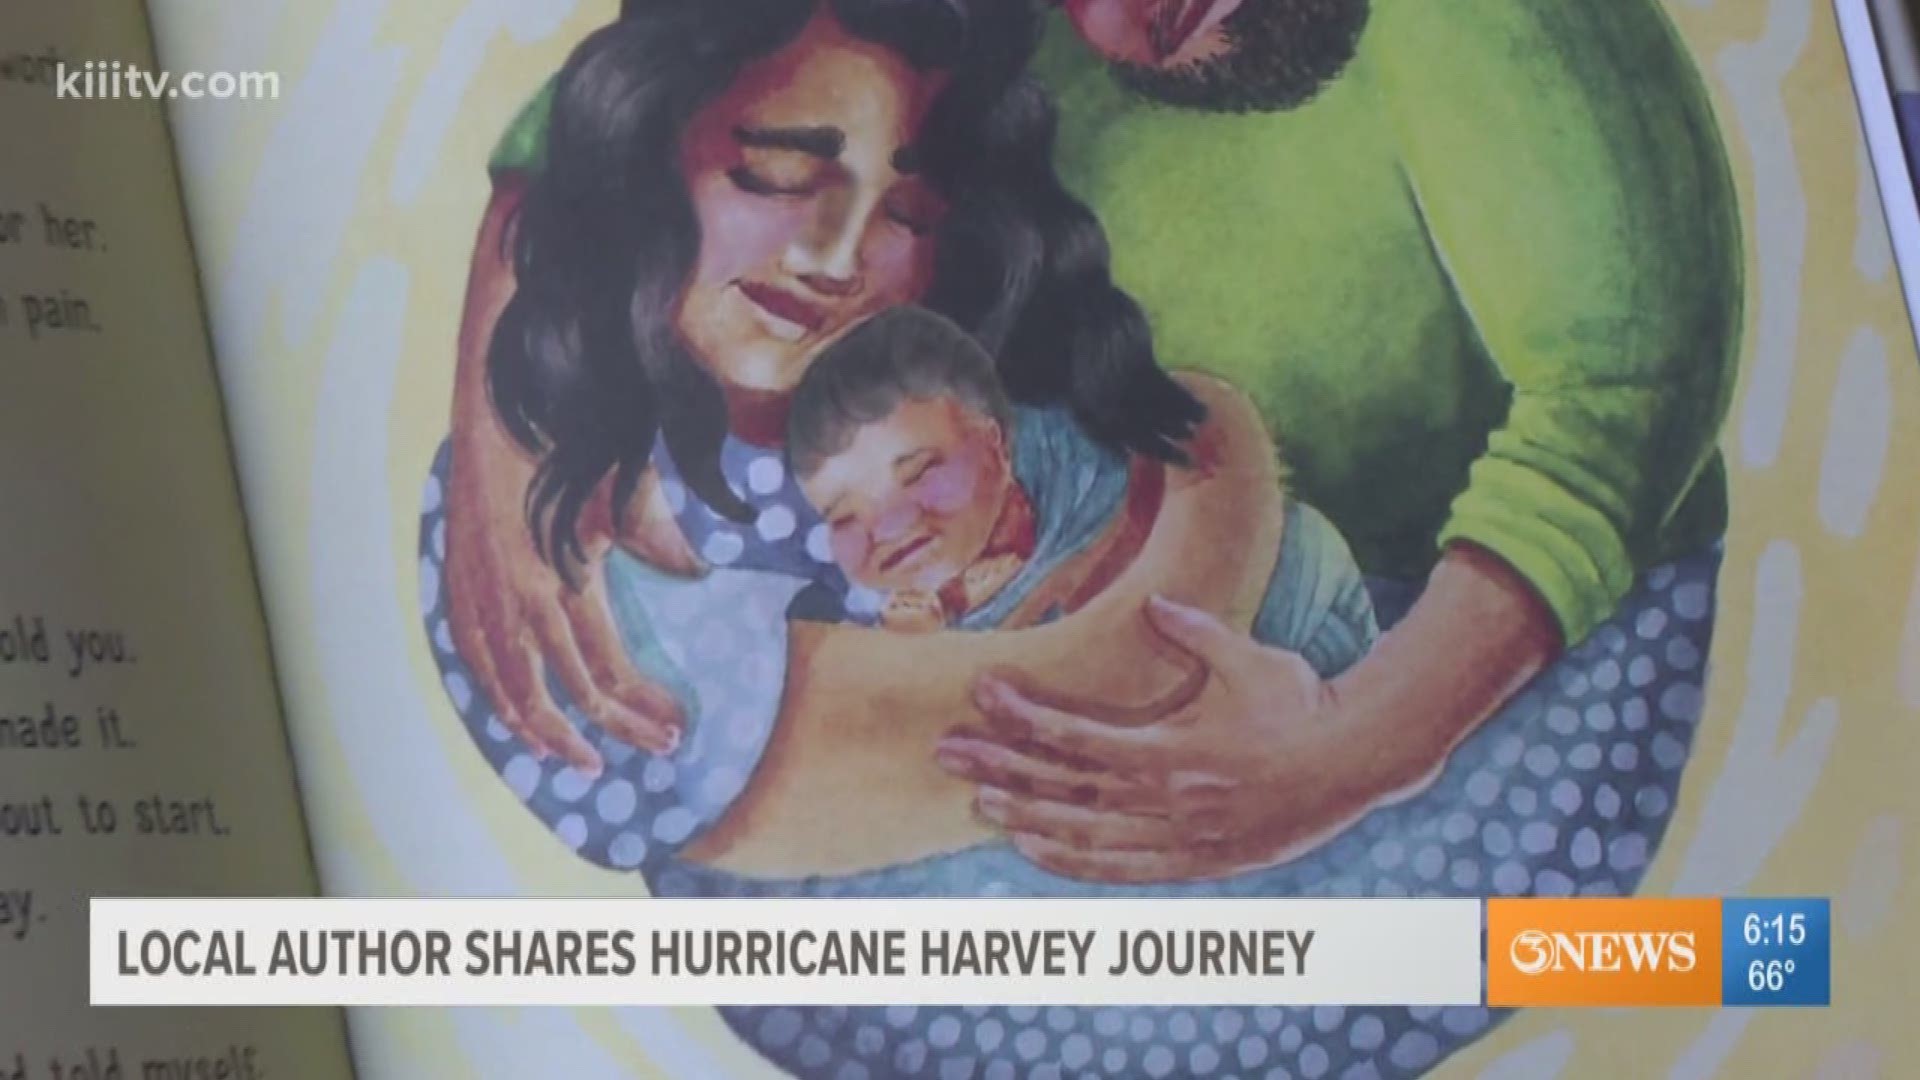 A corpus christi native is sharing his own family's journey about being brave during hurricane Harvey in a new book.